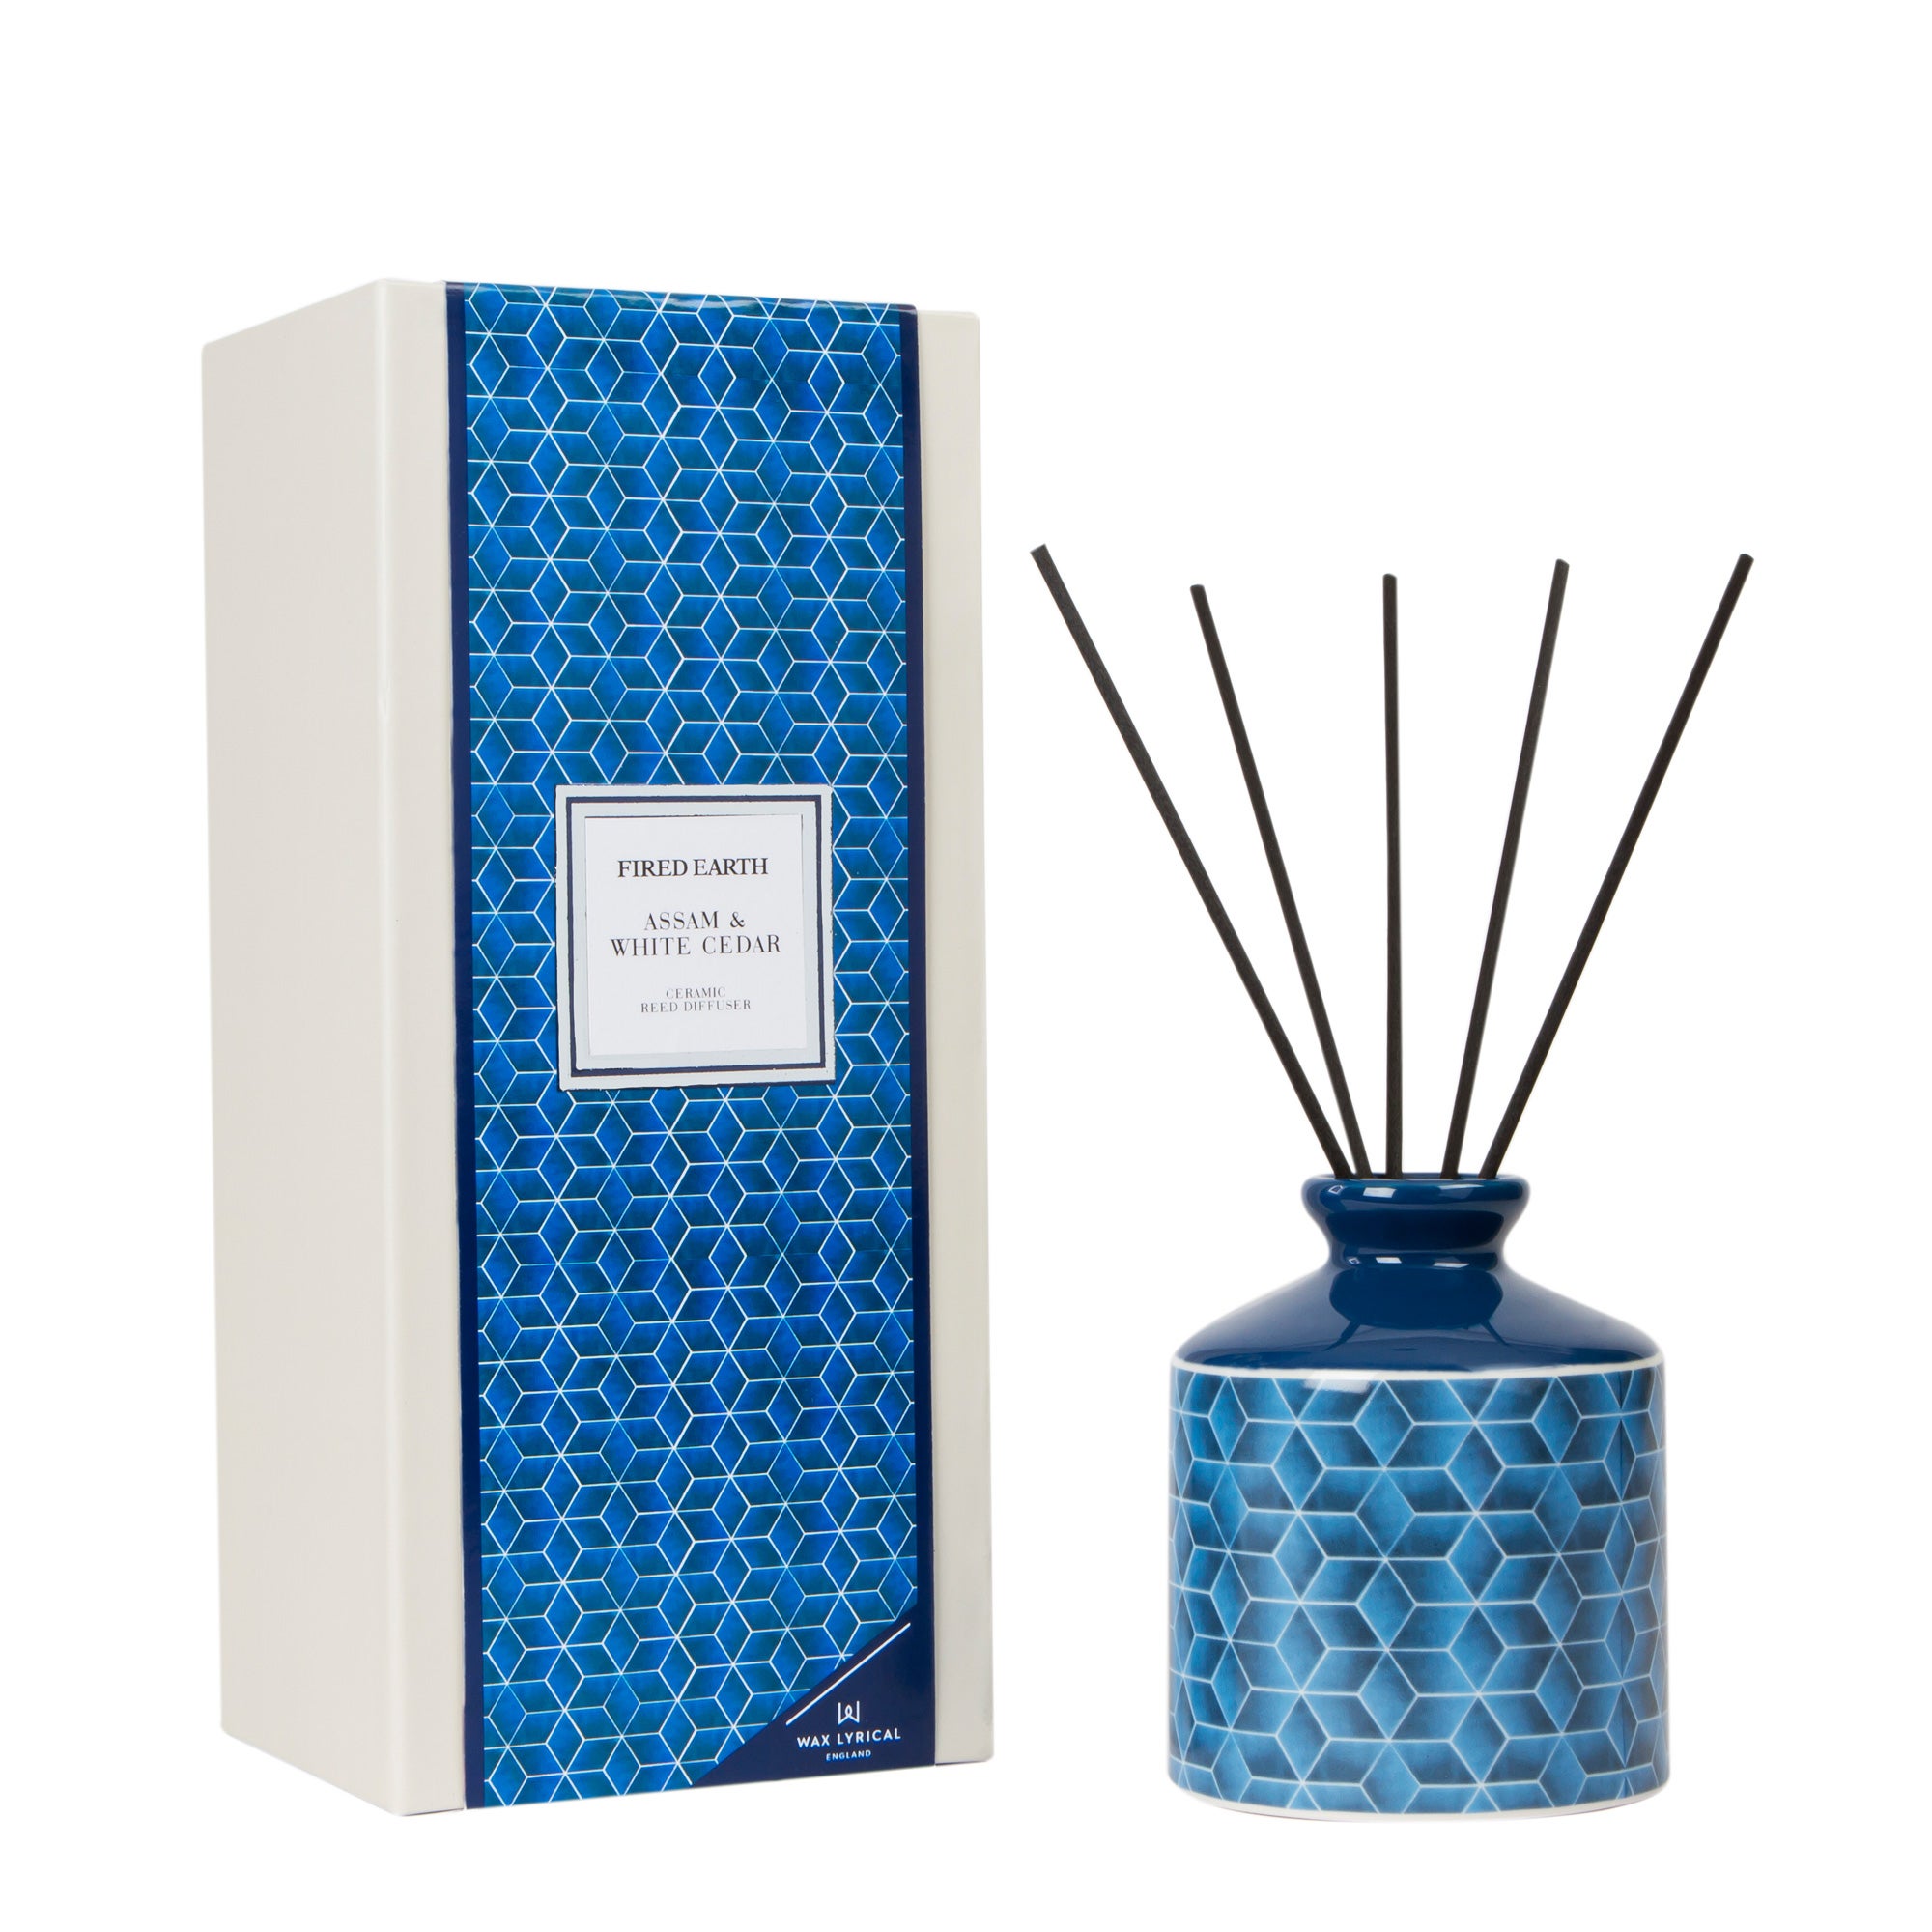 Photos - Other interior and decor A&D Fired Earth Ceramic Assam and White Cedar Diffuser Blue 